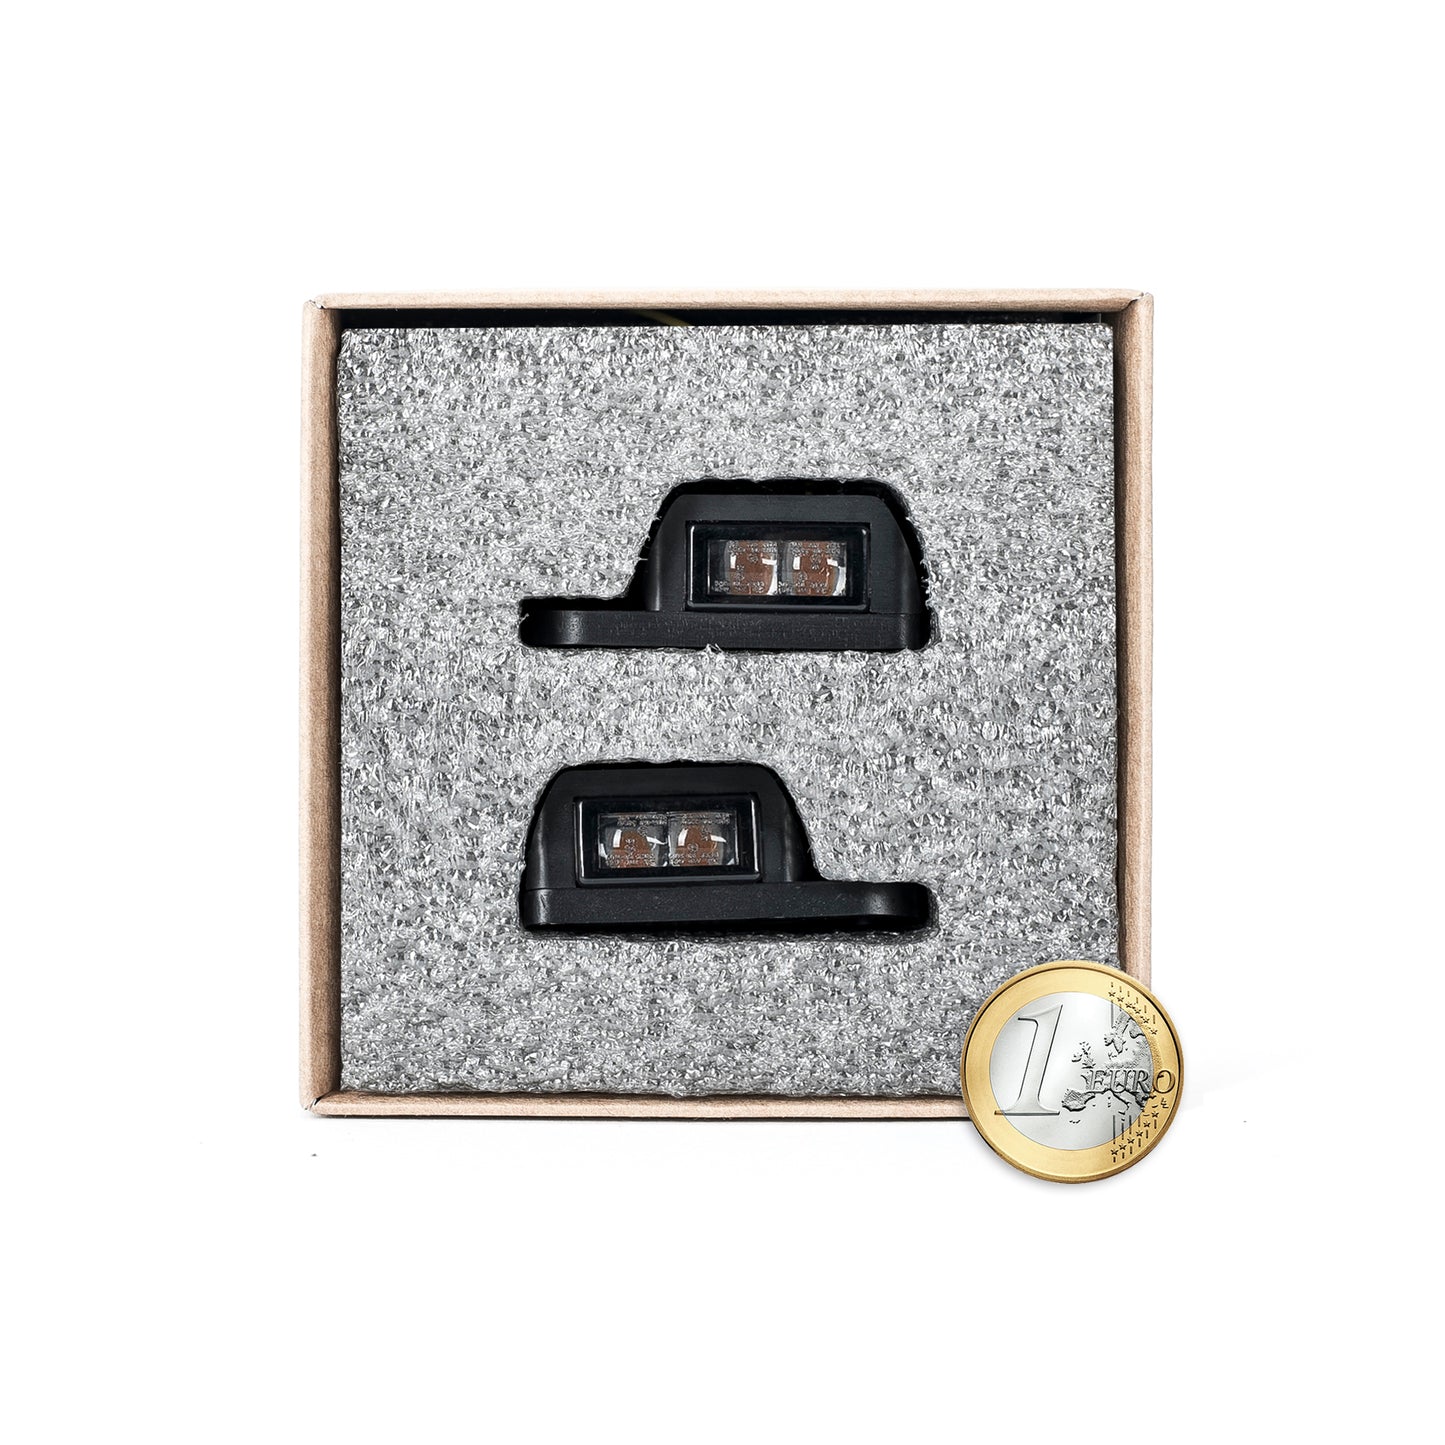 Harley Davidson "Turbo" led turn signals by Killer Custom in a package box white background